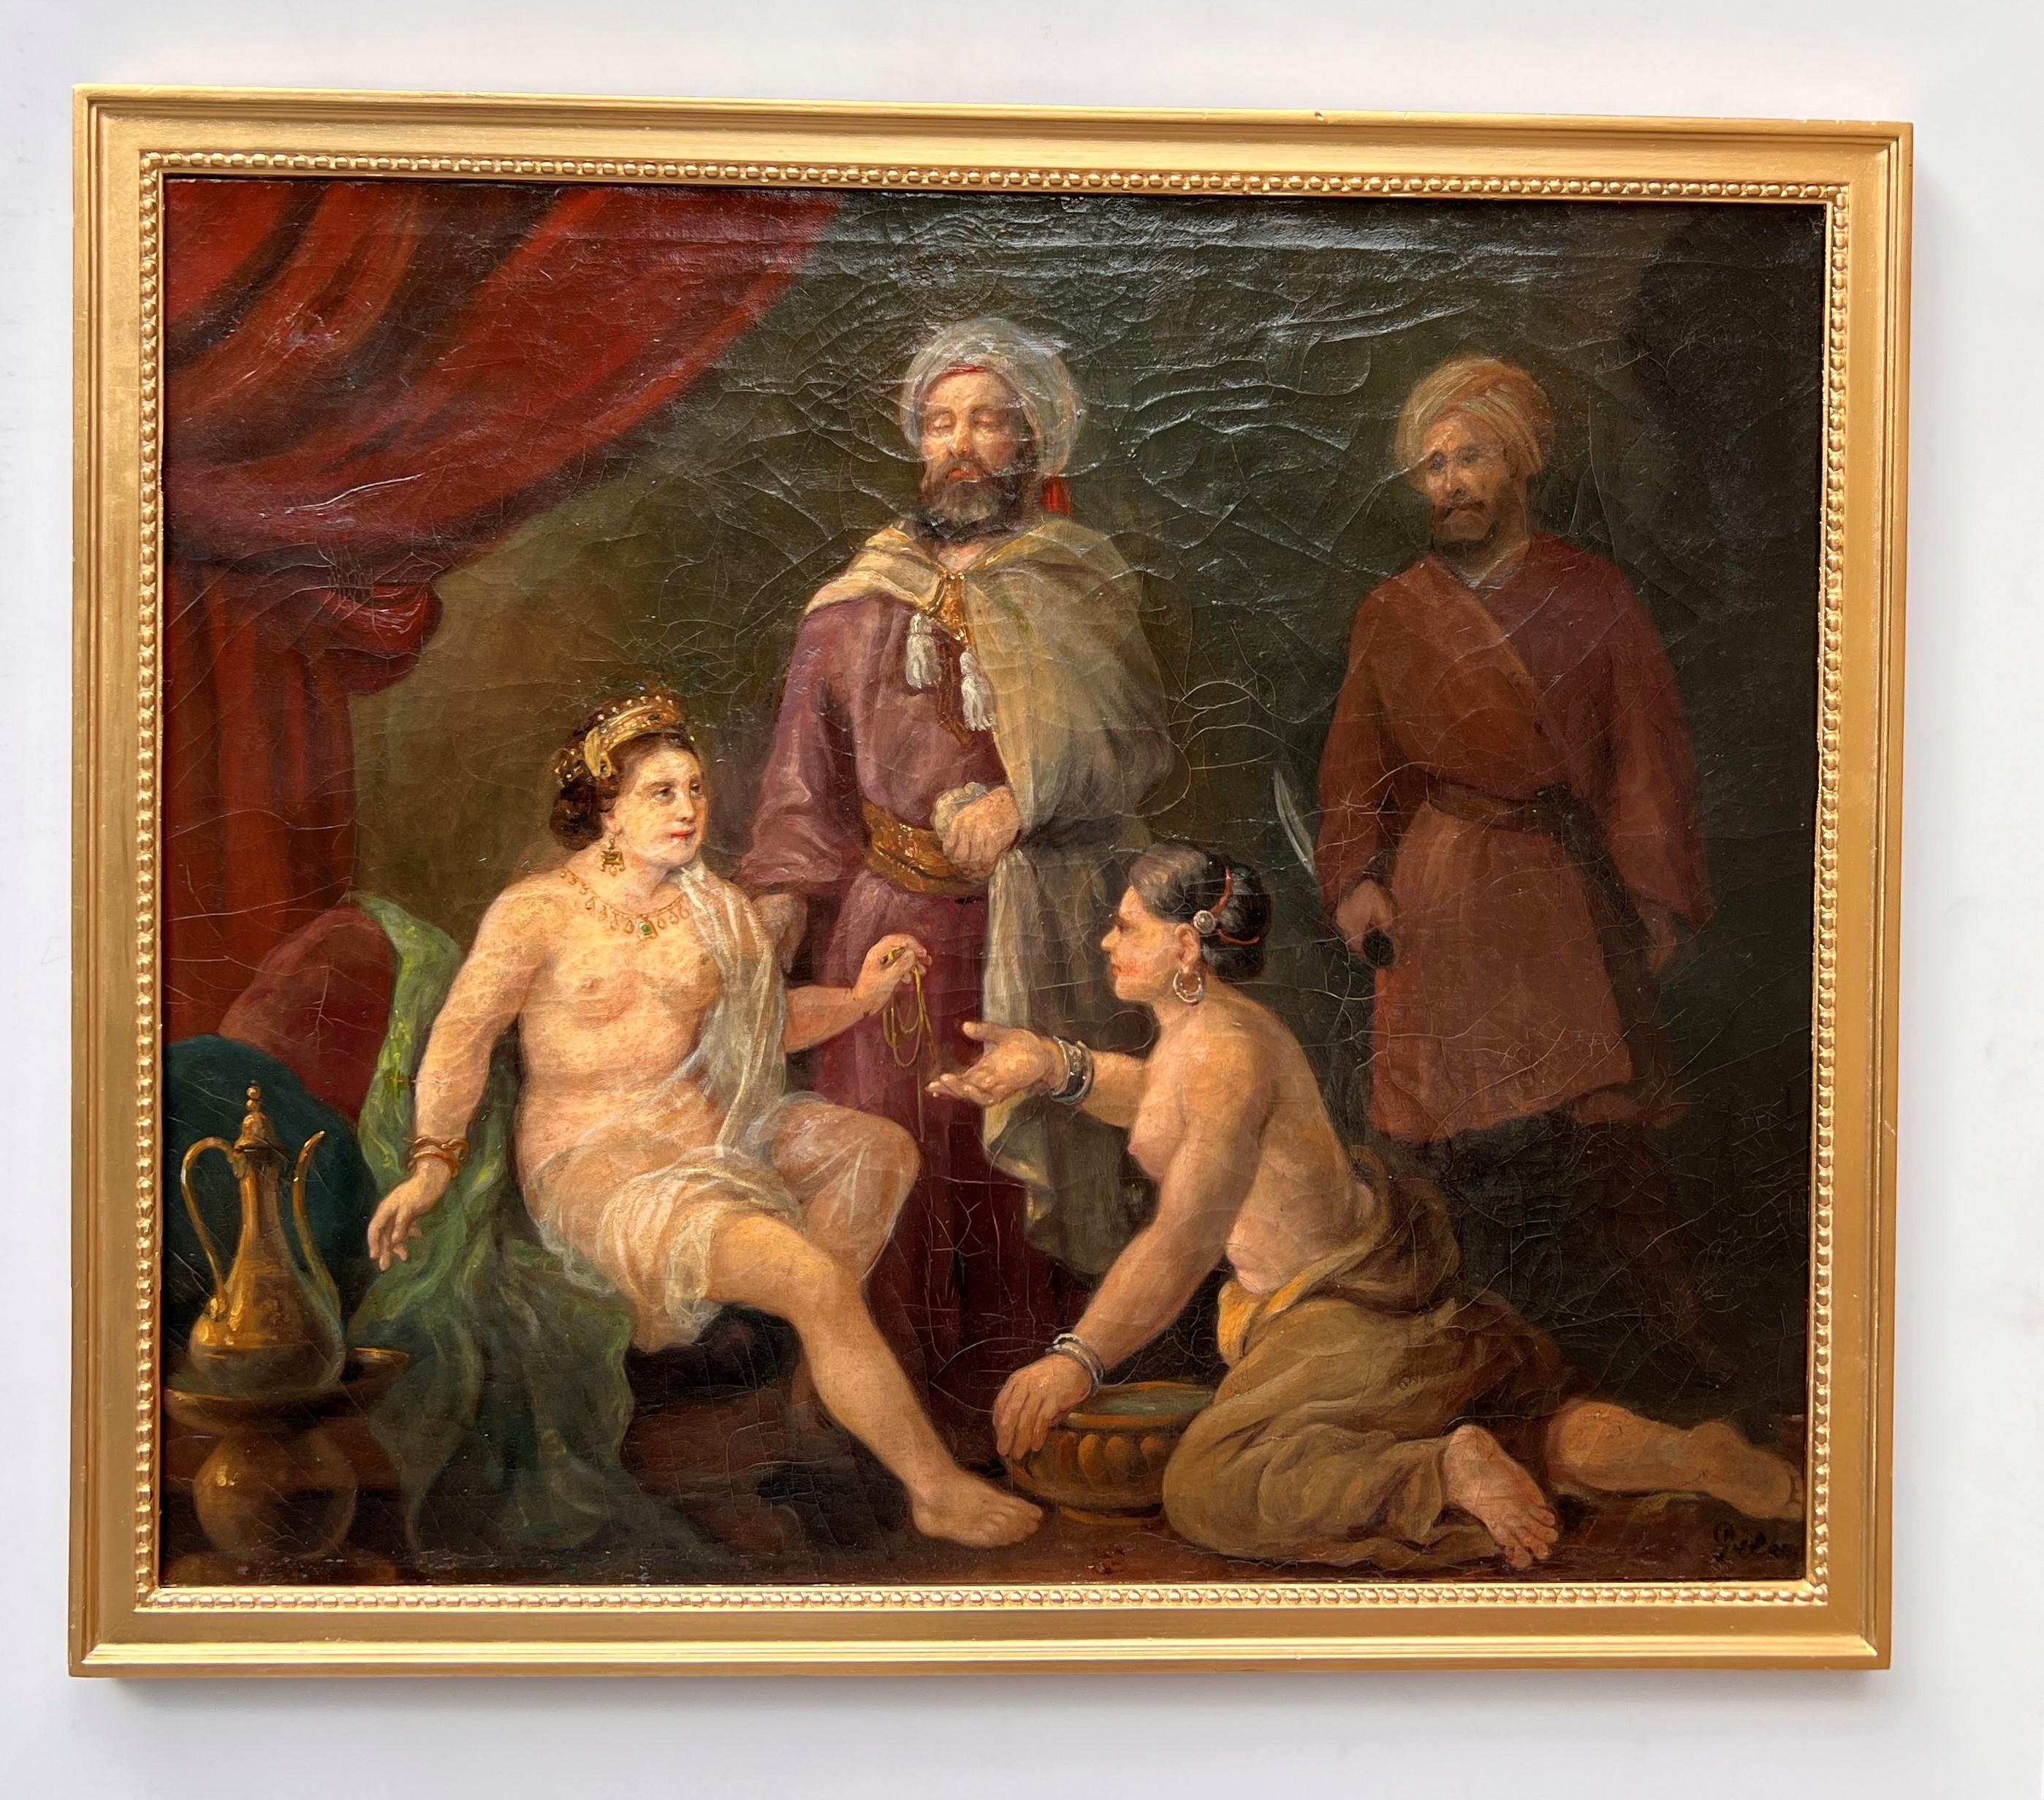 Up for sale is a fabulous antique 19th-century or even earlier original oil painting on canvas depicting an interior scene with a seated female nude queen wearing a jeweled crown and ancient Roman-style gold and gem-studded jewelry. She is draped in